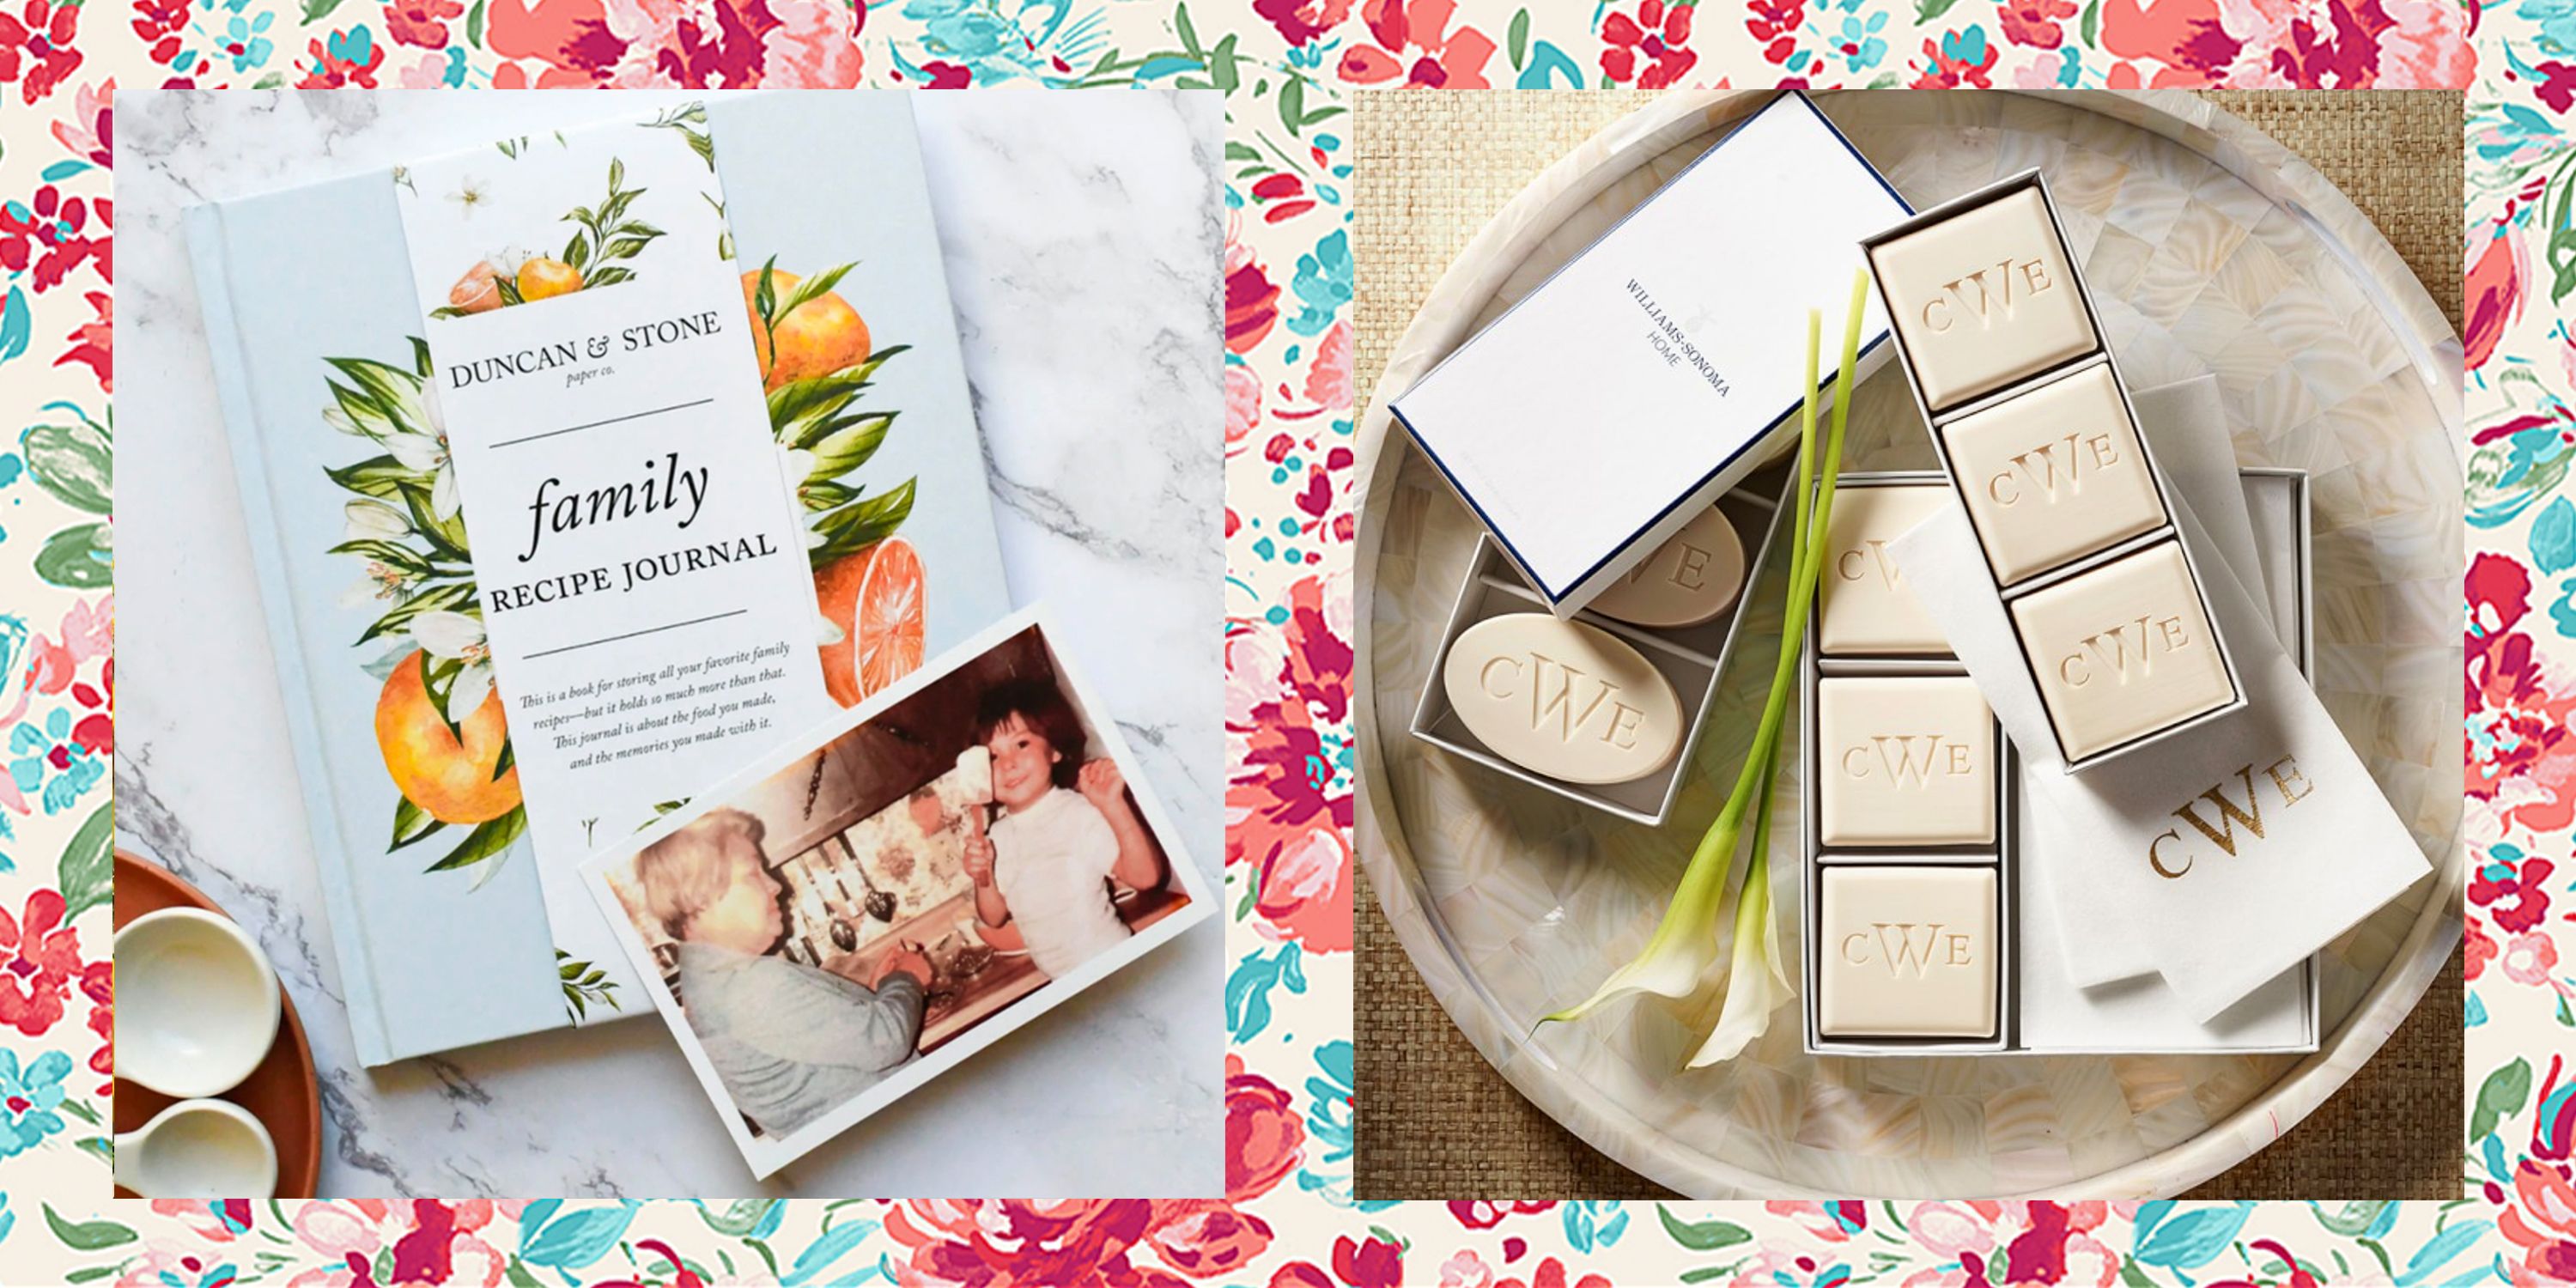 15 Thoughtful Mother's Day Gifts for Daughter-in-law to Warm Her Hearts